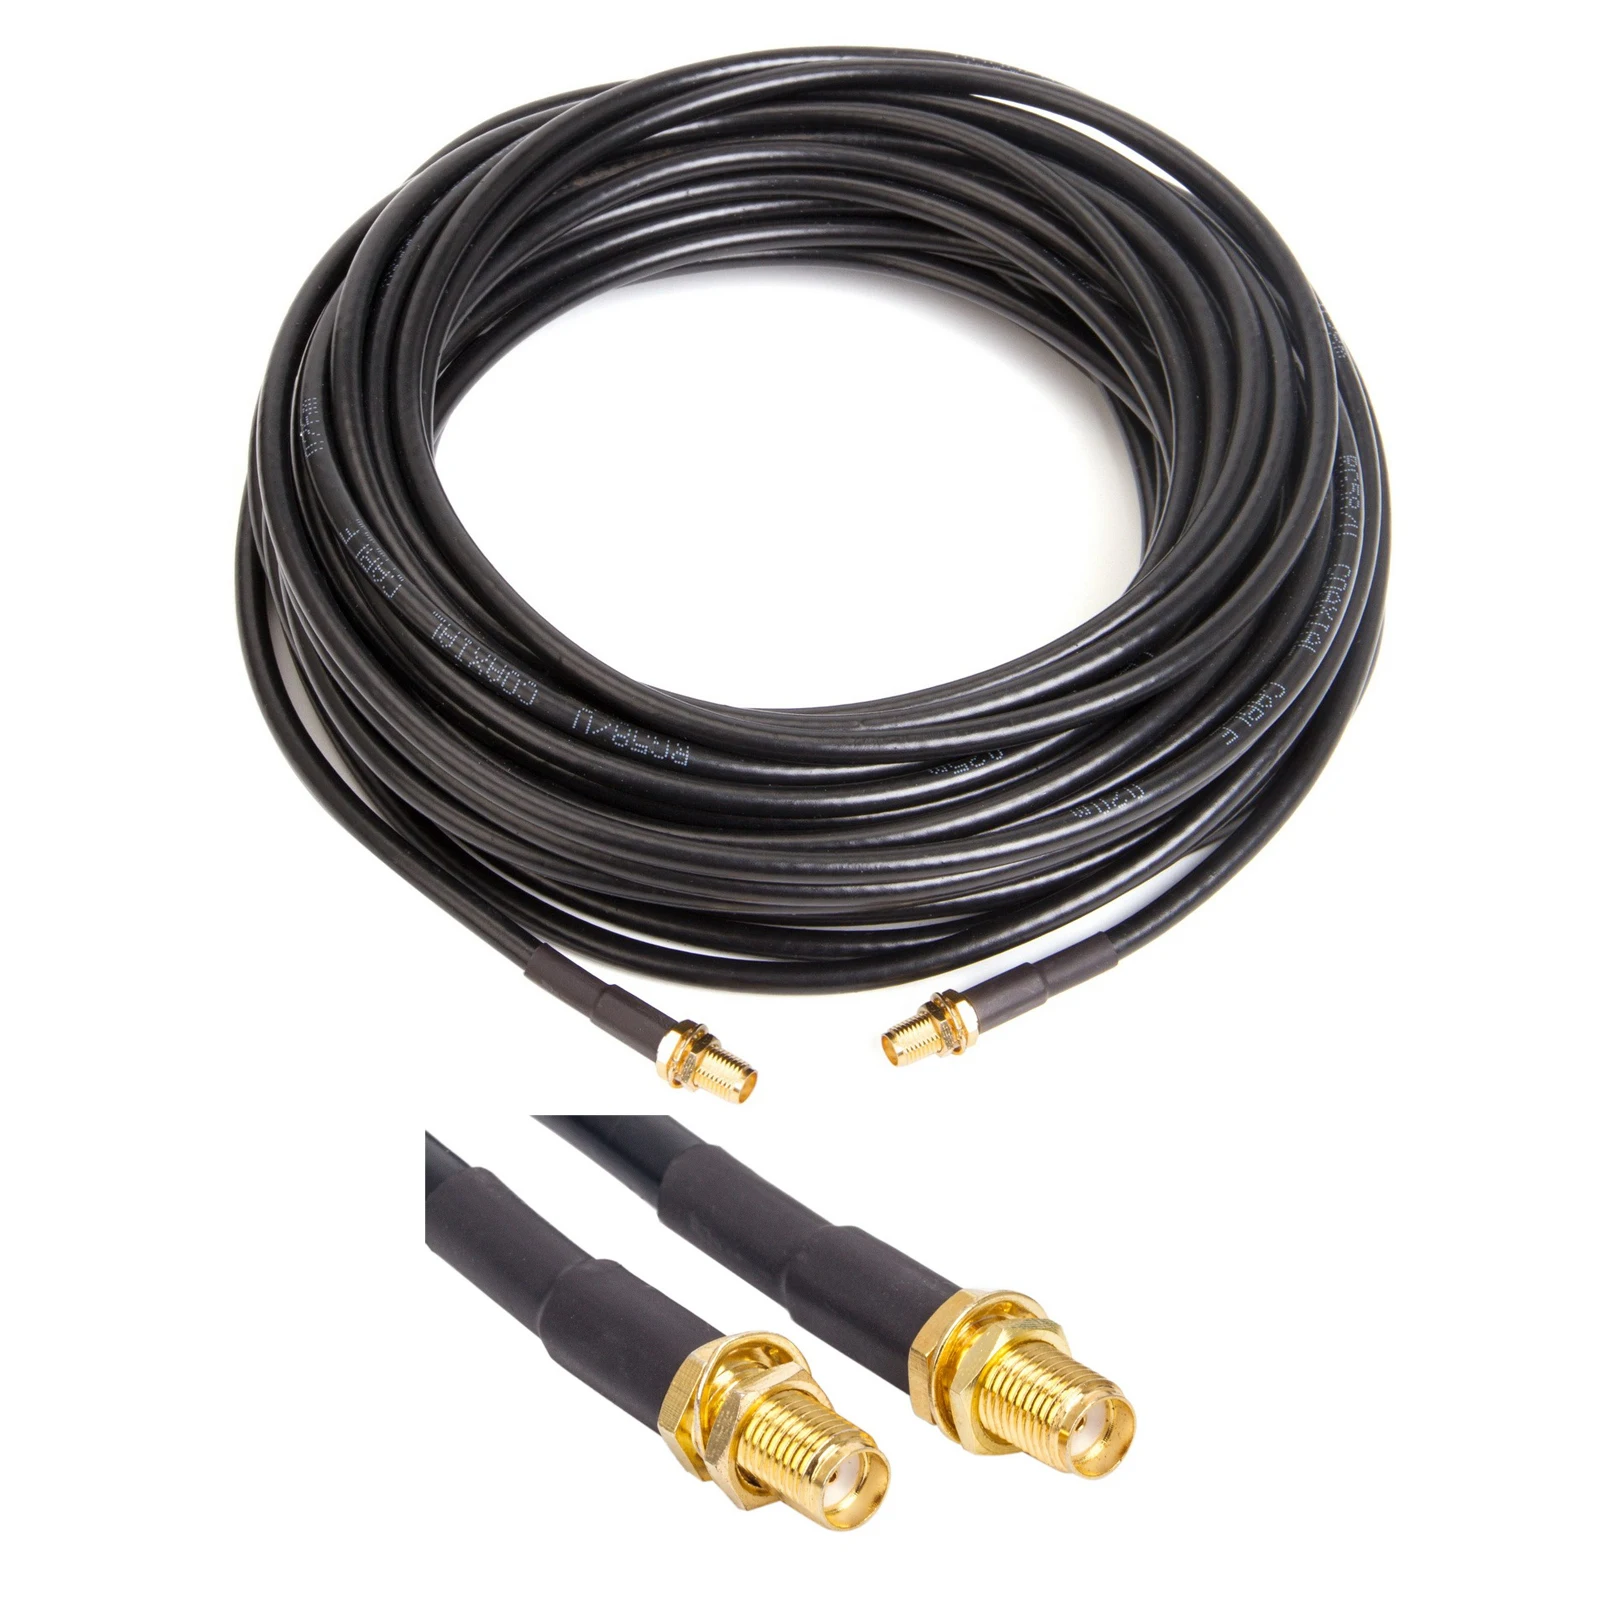 5M feeder SMA female to SMA female Extension Cable for Coax Coaxial WiFi Network Card Router Antenna RF Connector RG174 Cable